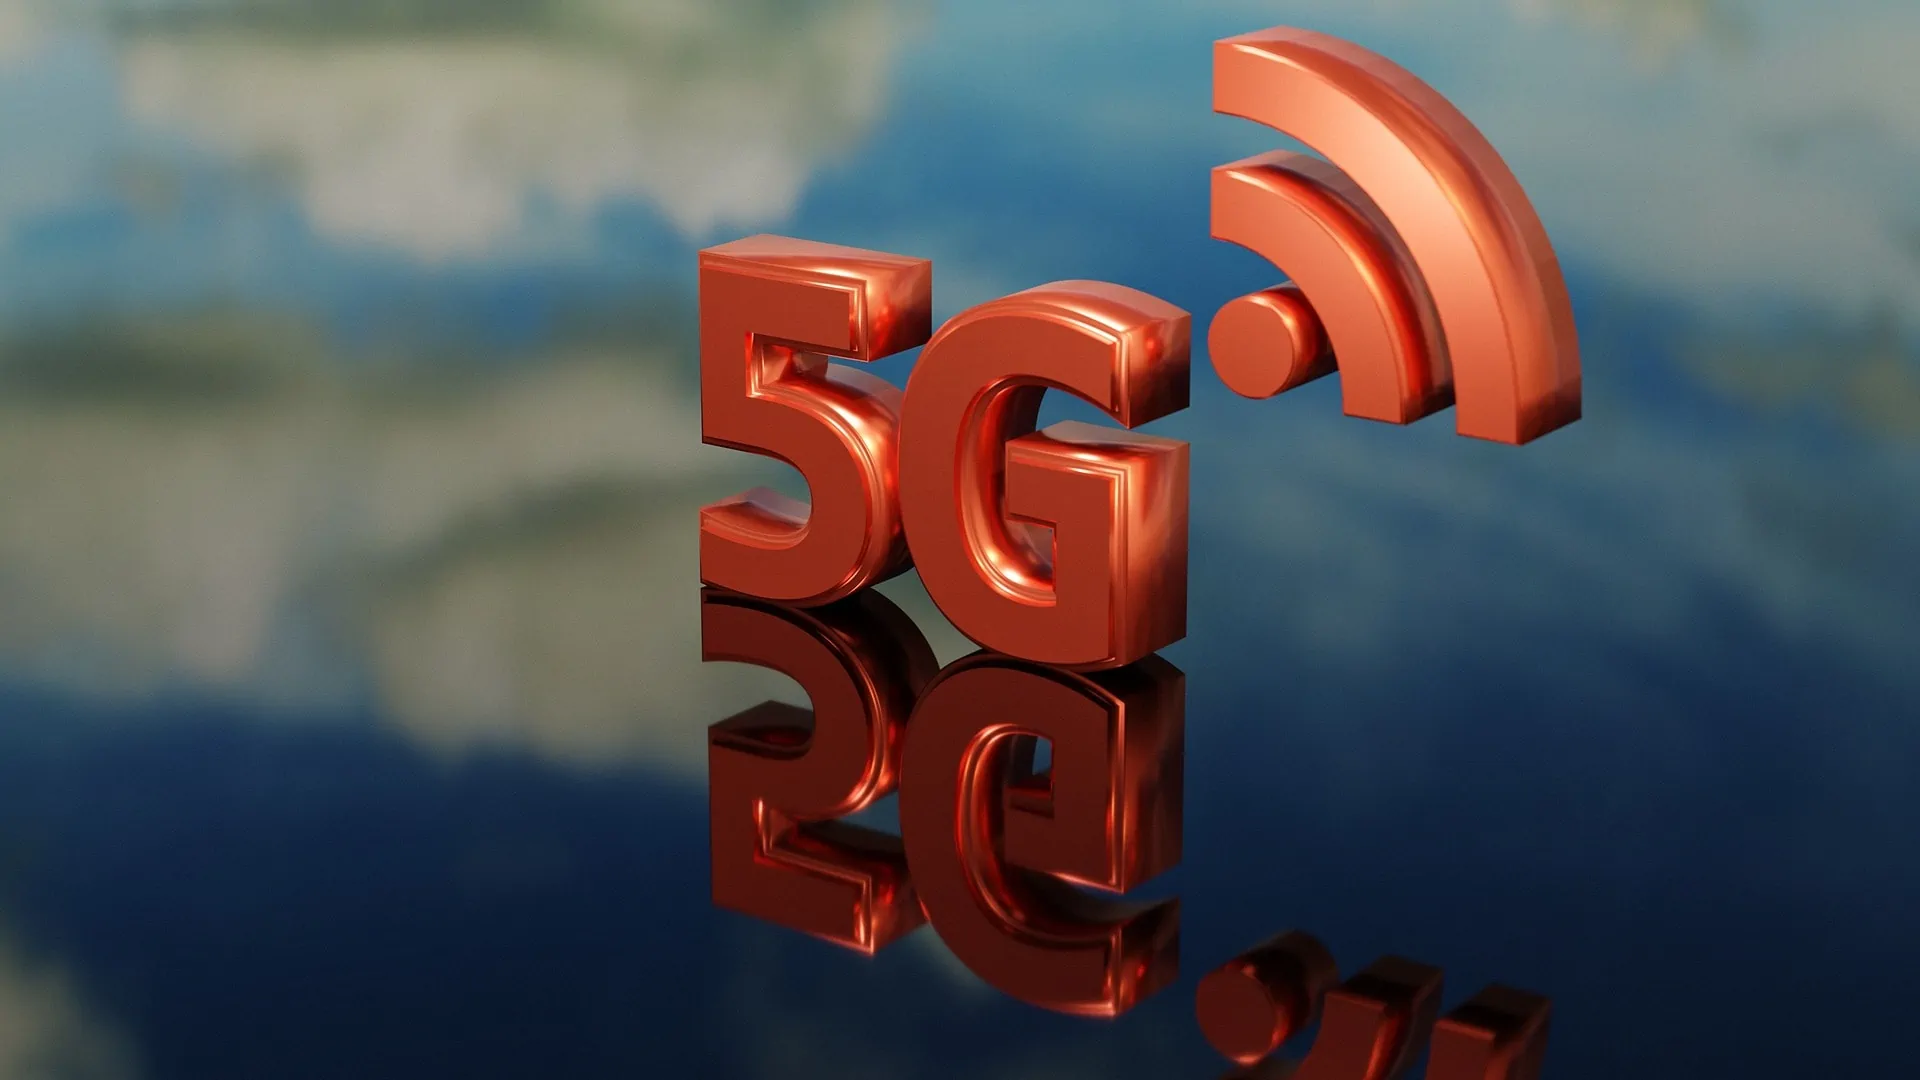 What should you know about 5G?